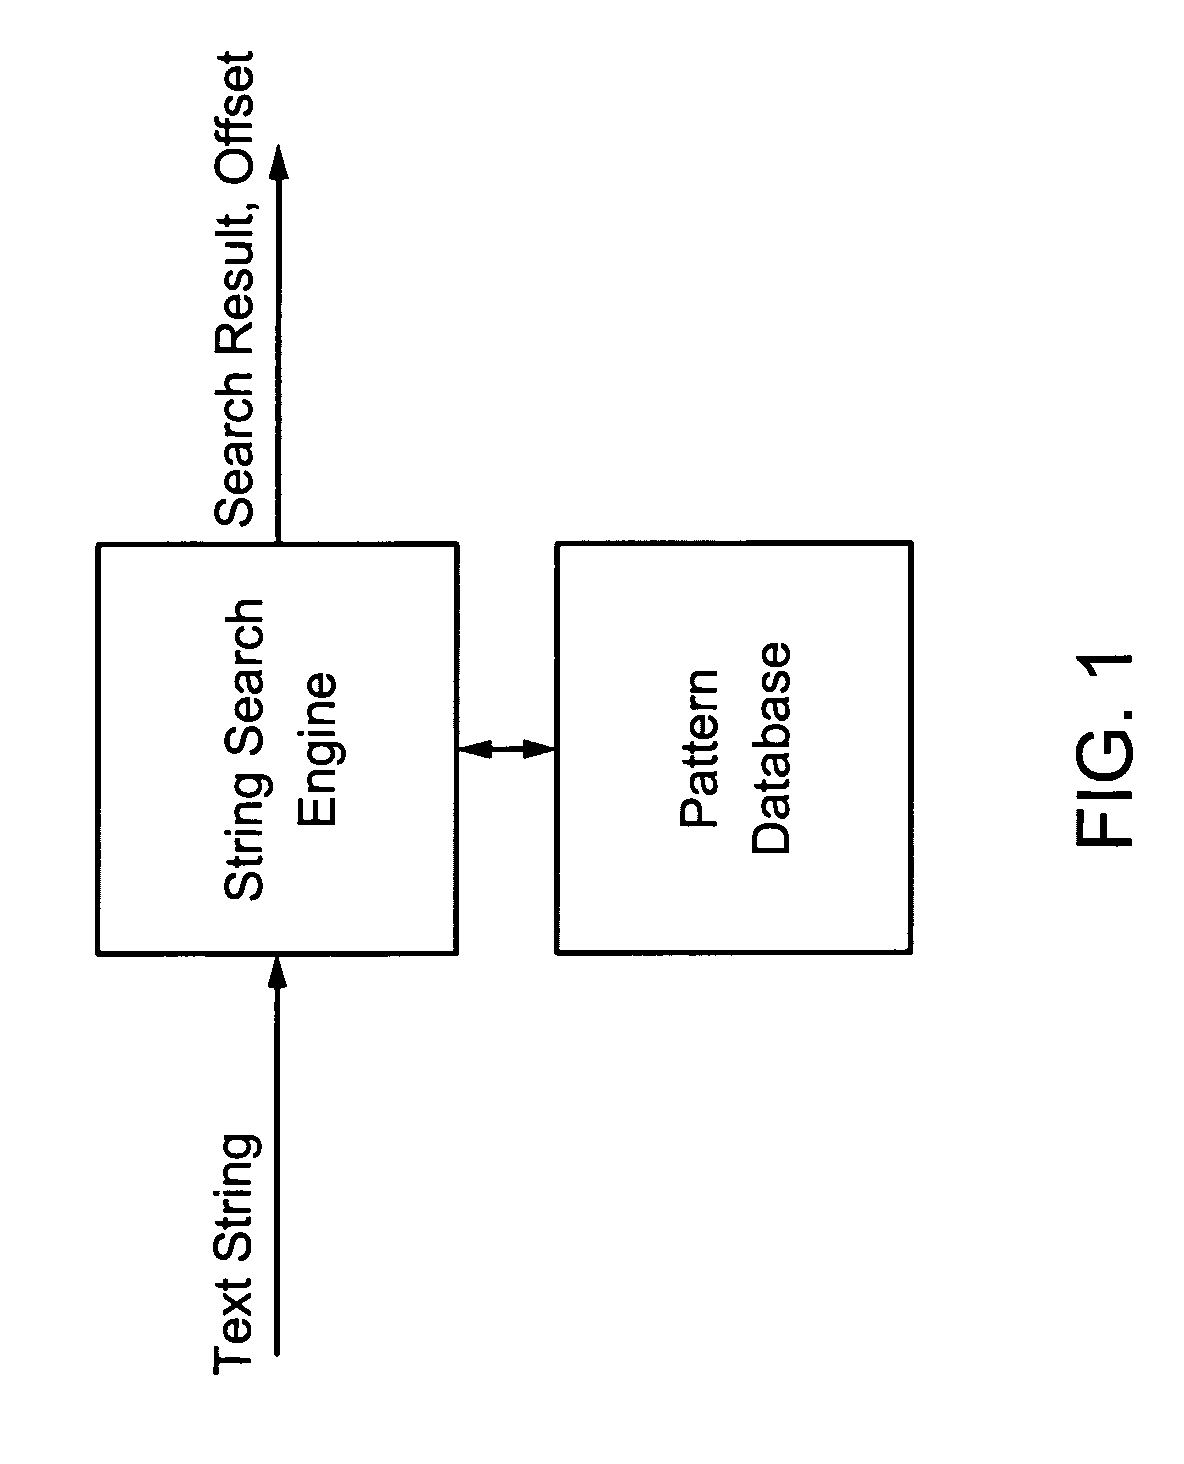 Search circuit having individually selectable search engines